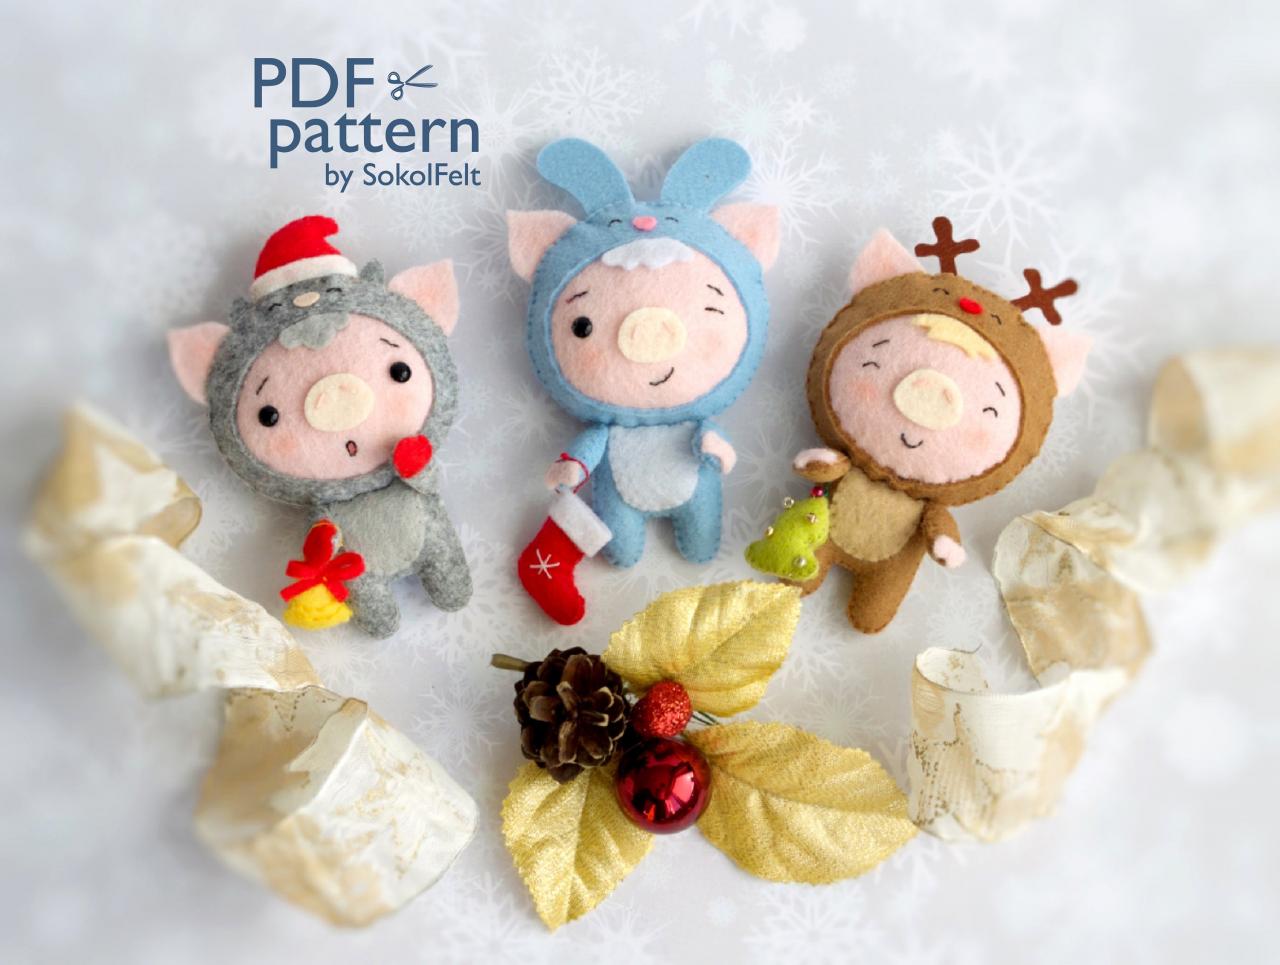 Felt Christmas Pig toys sewing PDF patterns, Pig ornament set, Piglet pattern for baby crib mobile, Baby ornaments, Pig lover gift